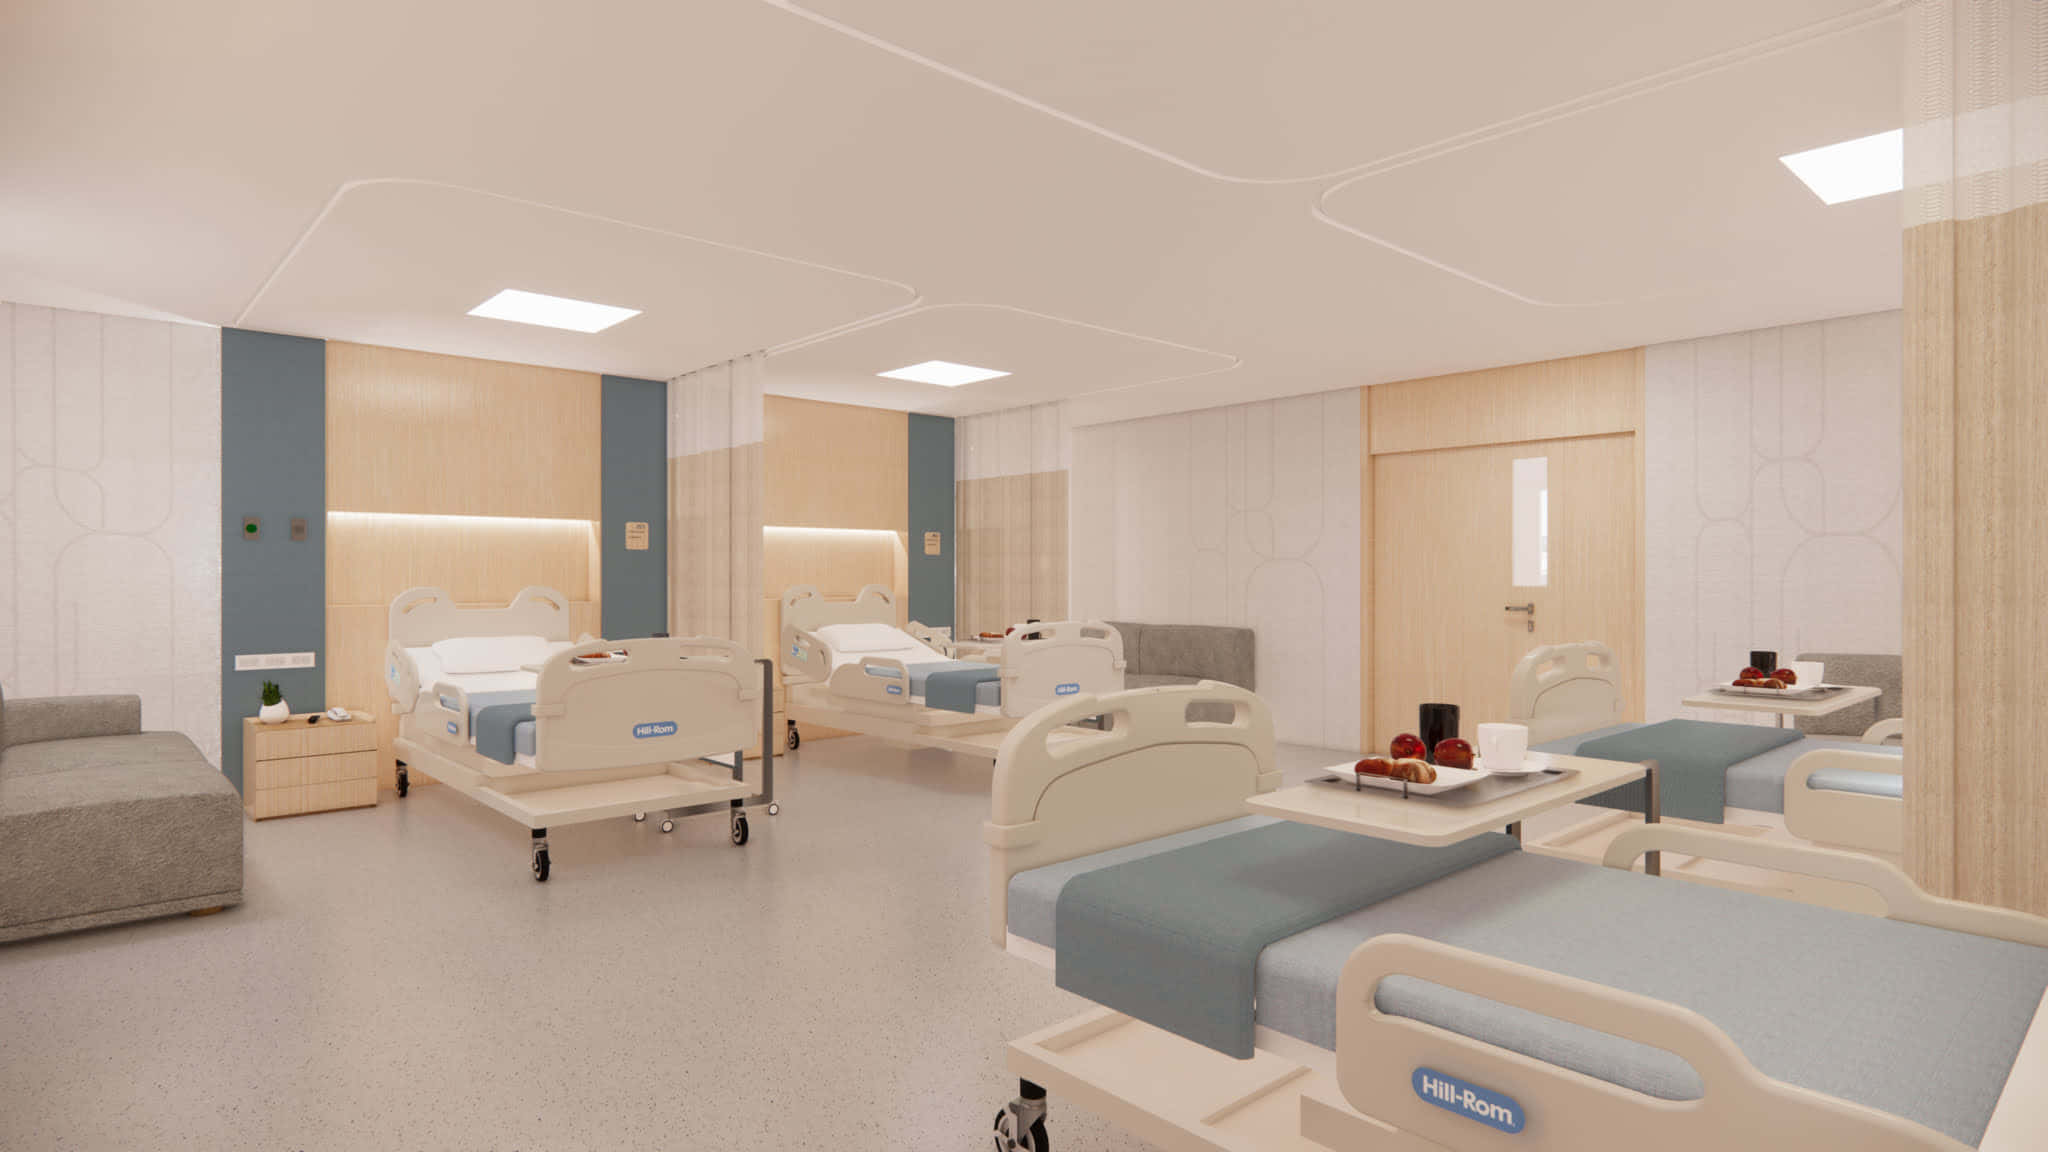 A Hospital Room With Beds And Chairs